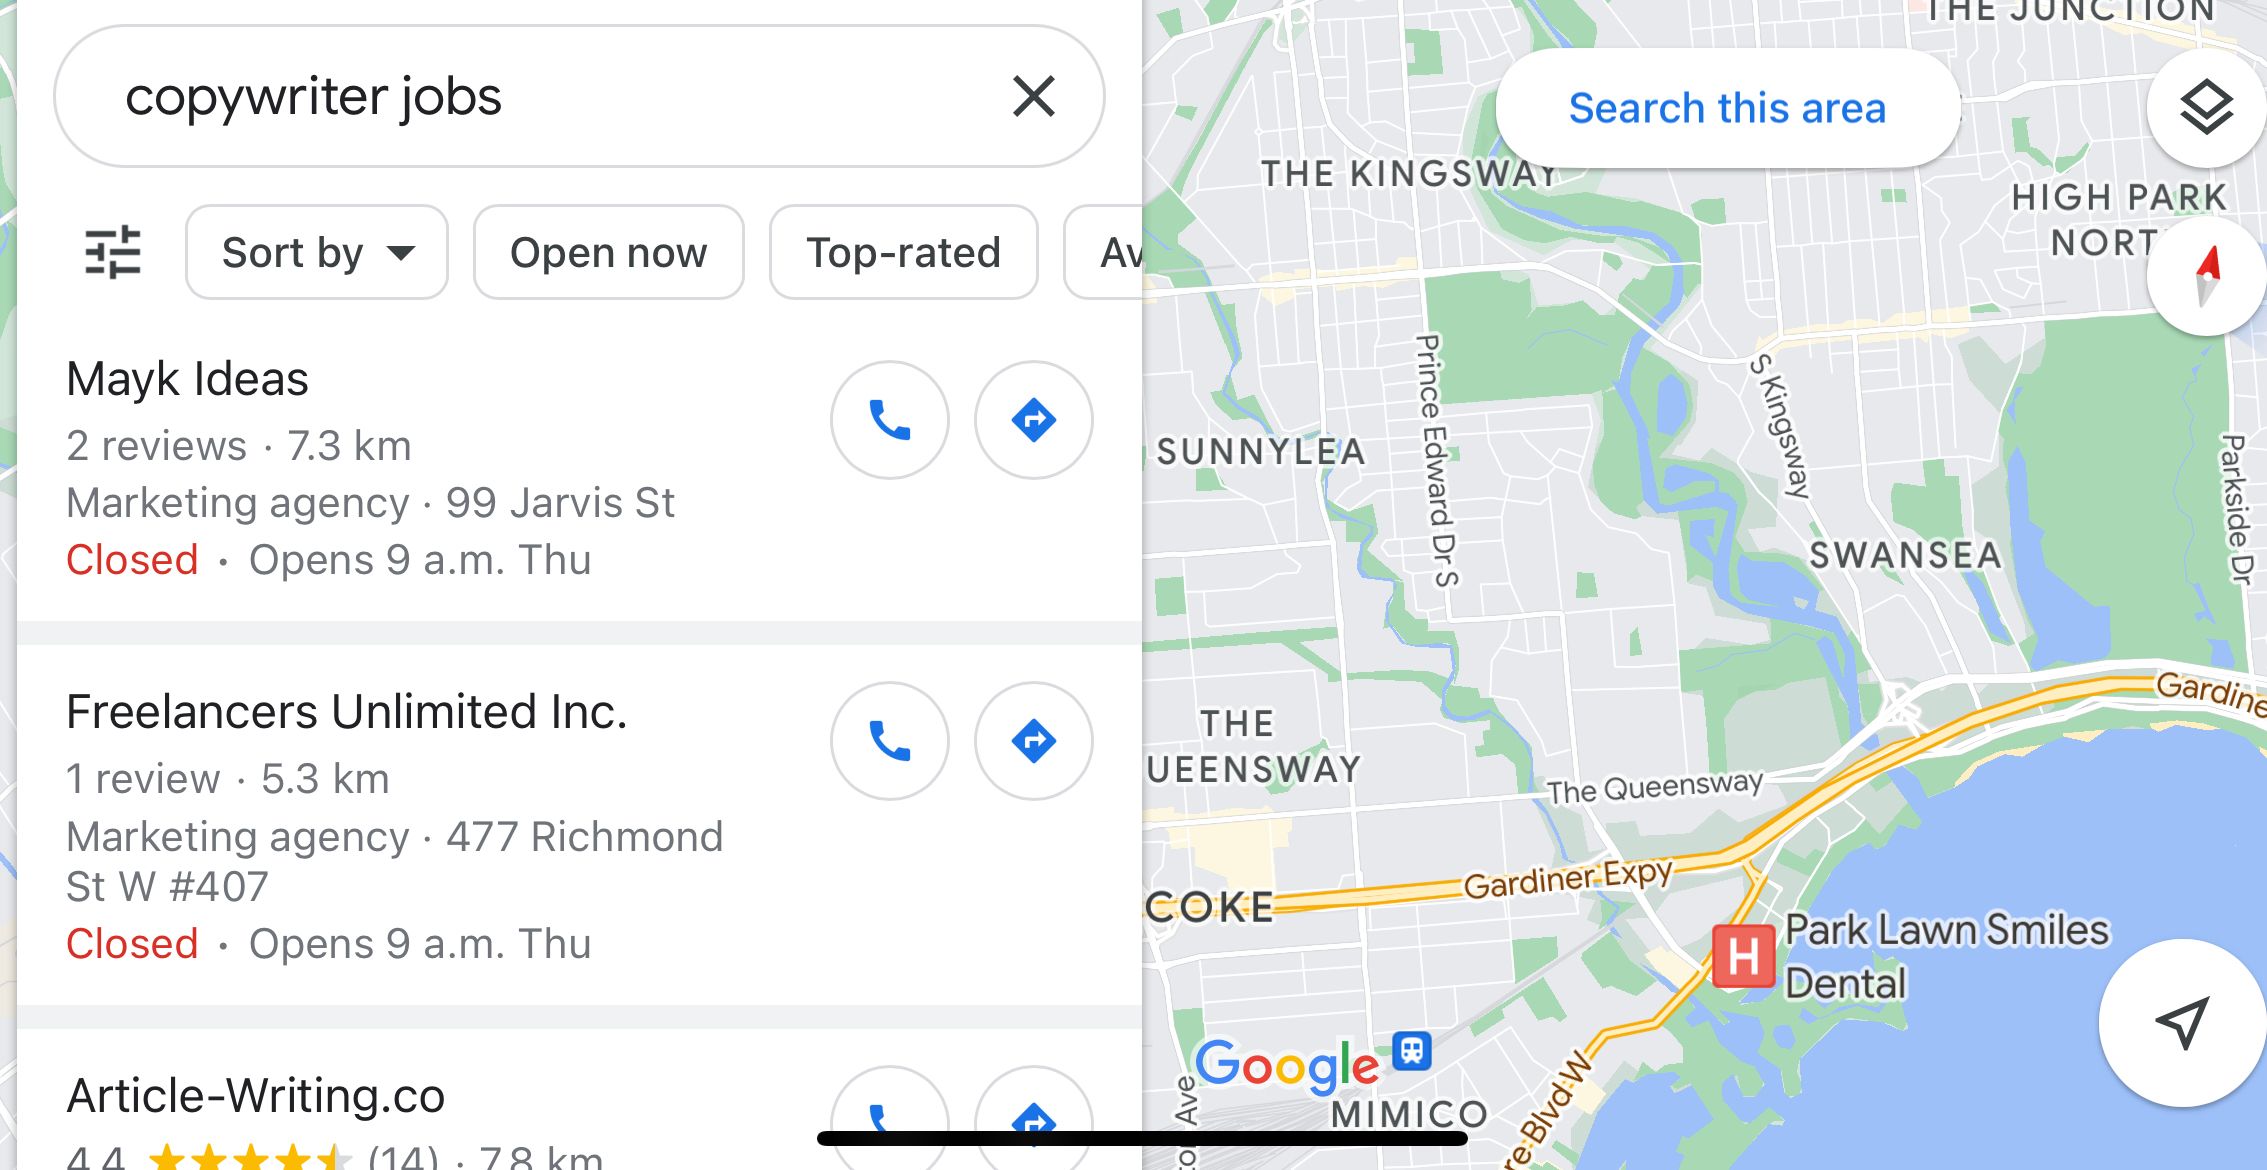 Search Area in Maps